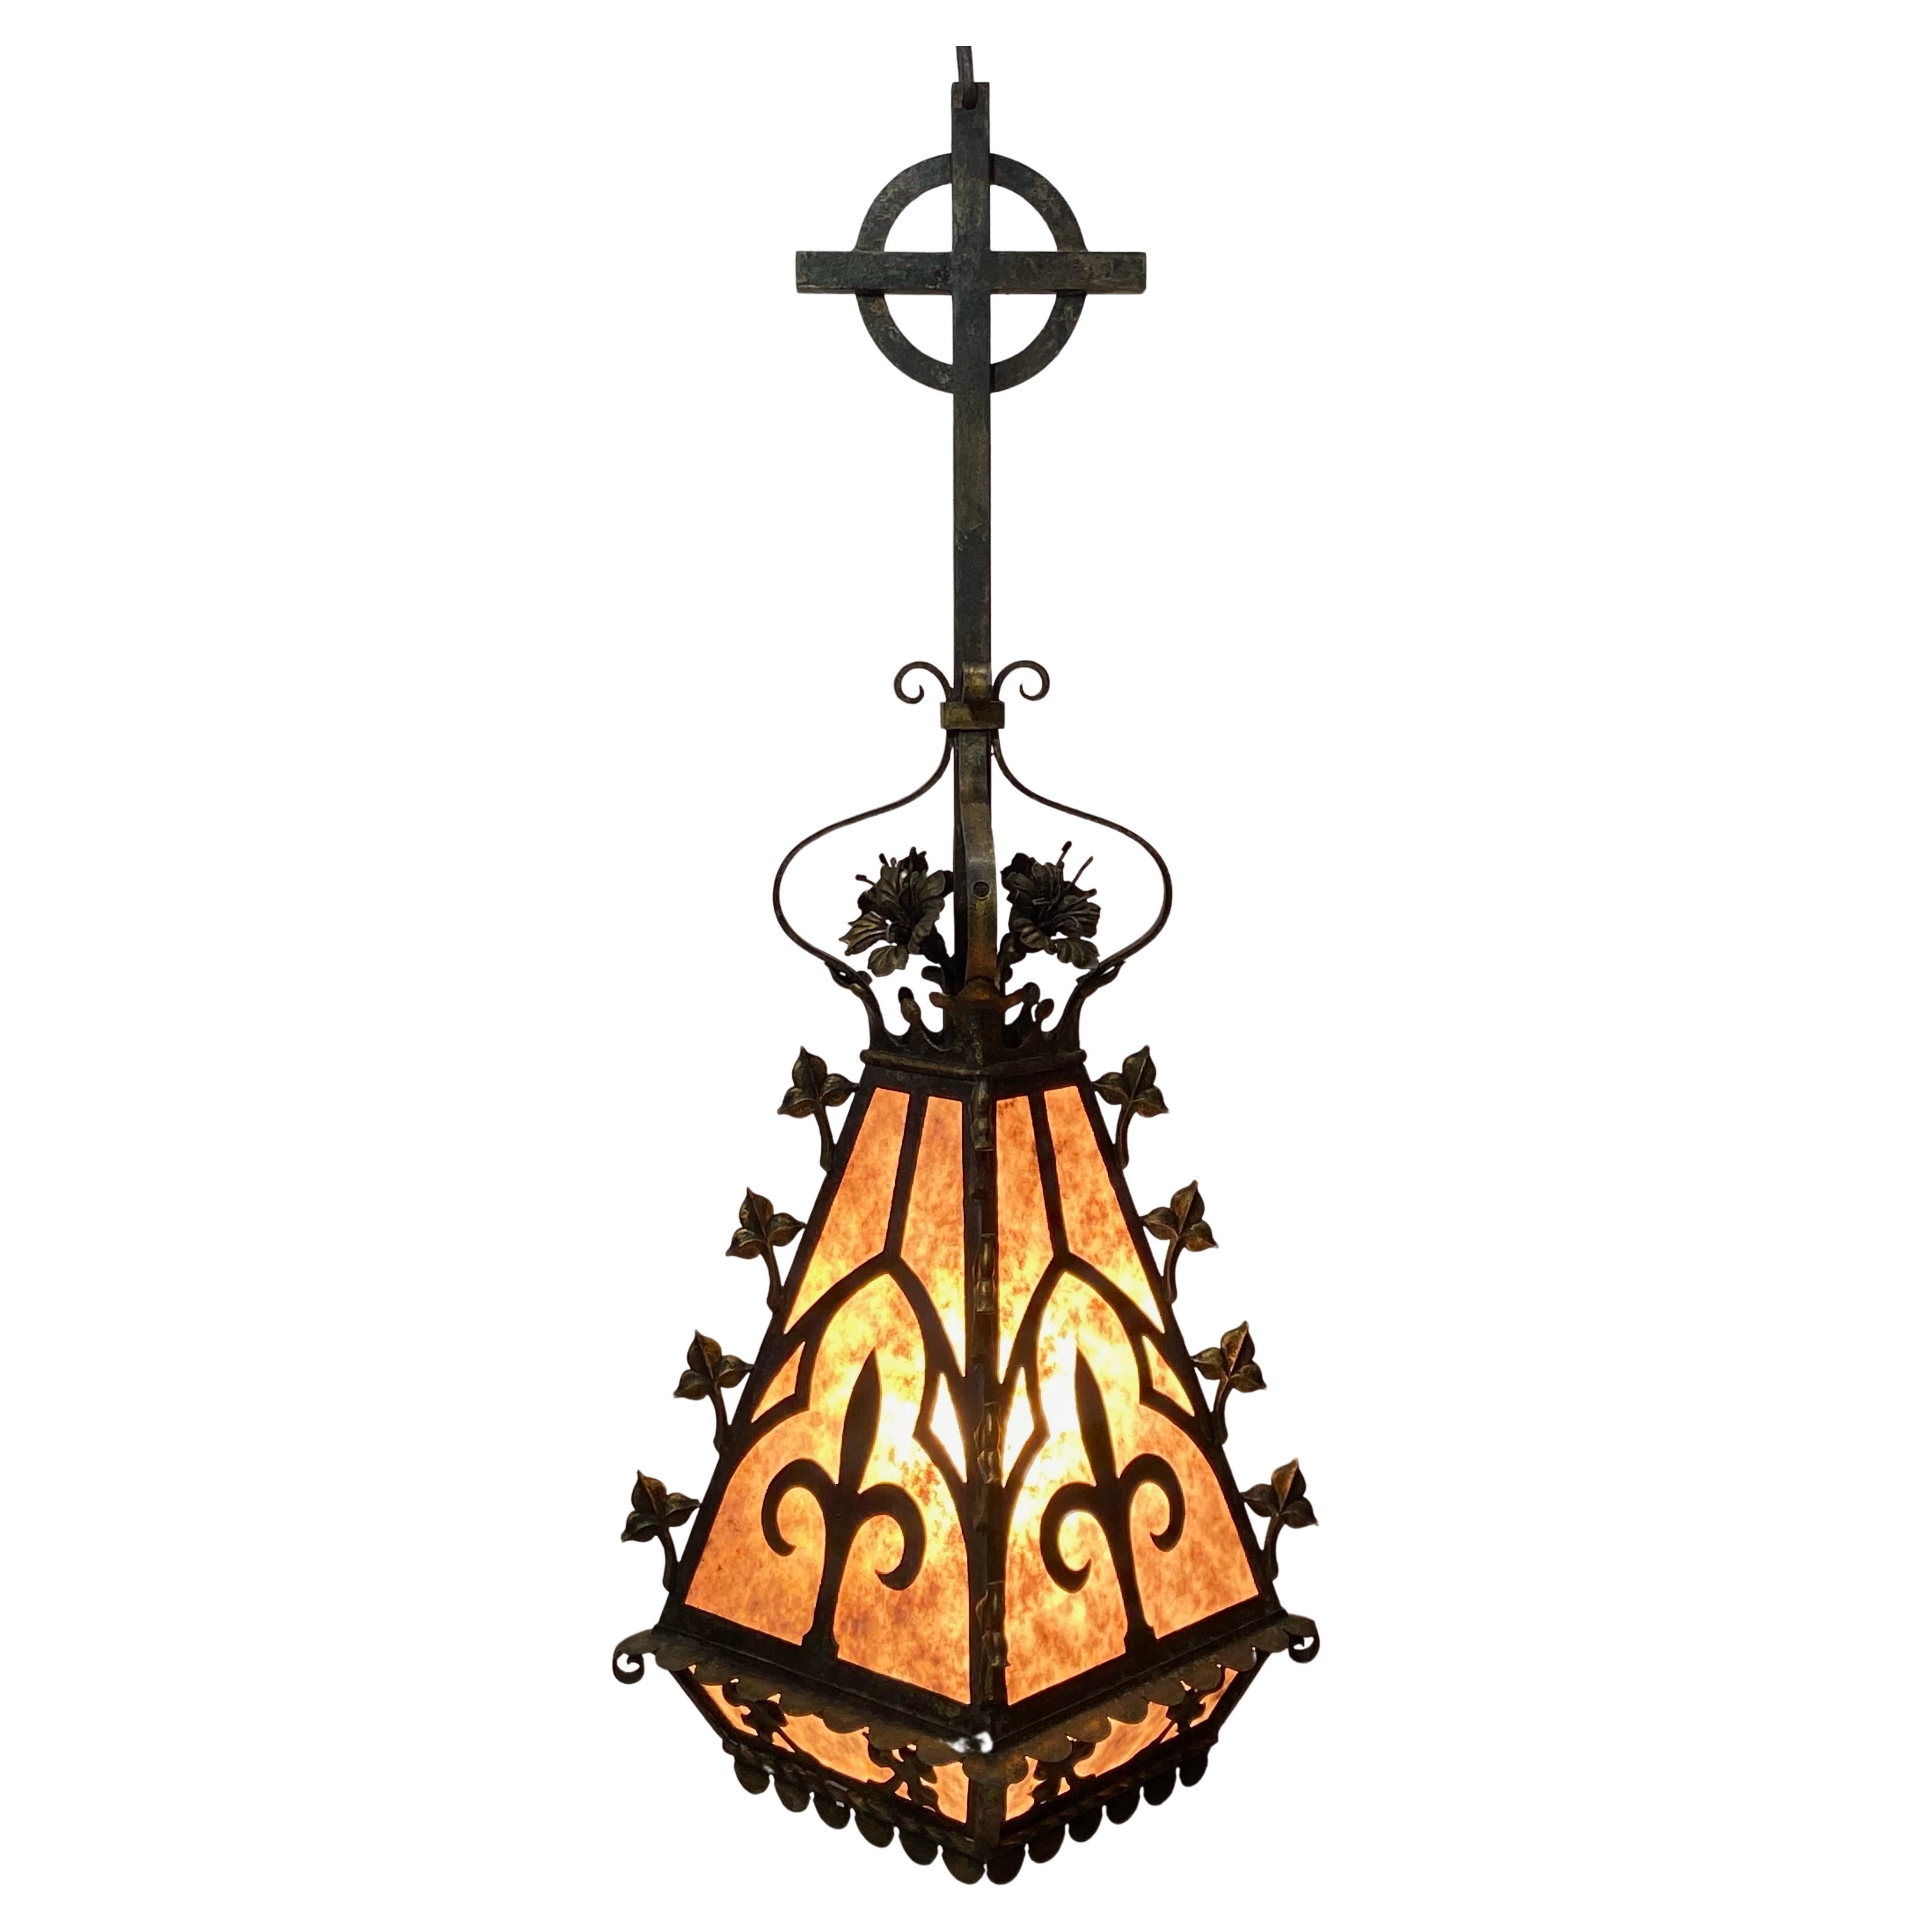 Large French Wrought Iron and Mica Church Lantern, 19th Century